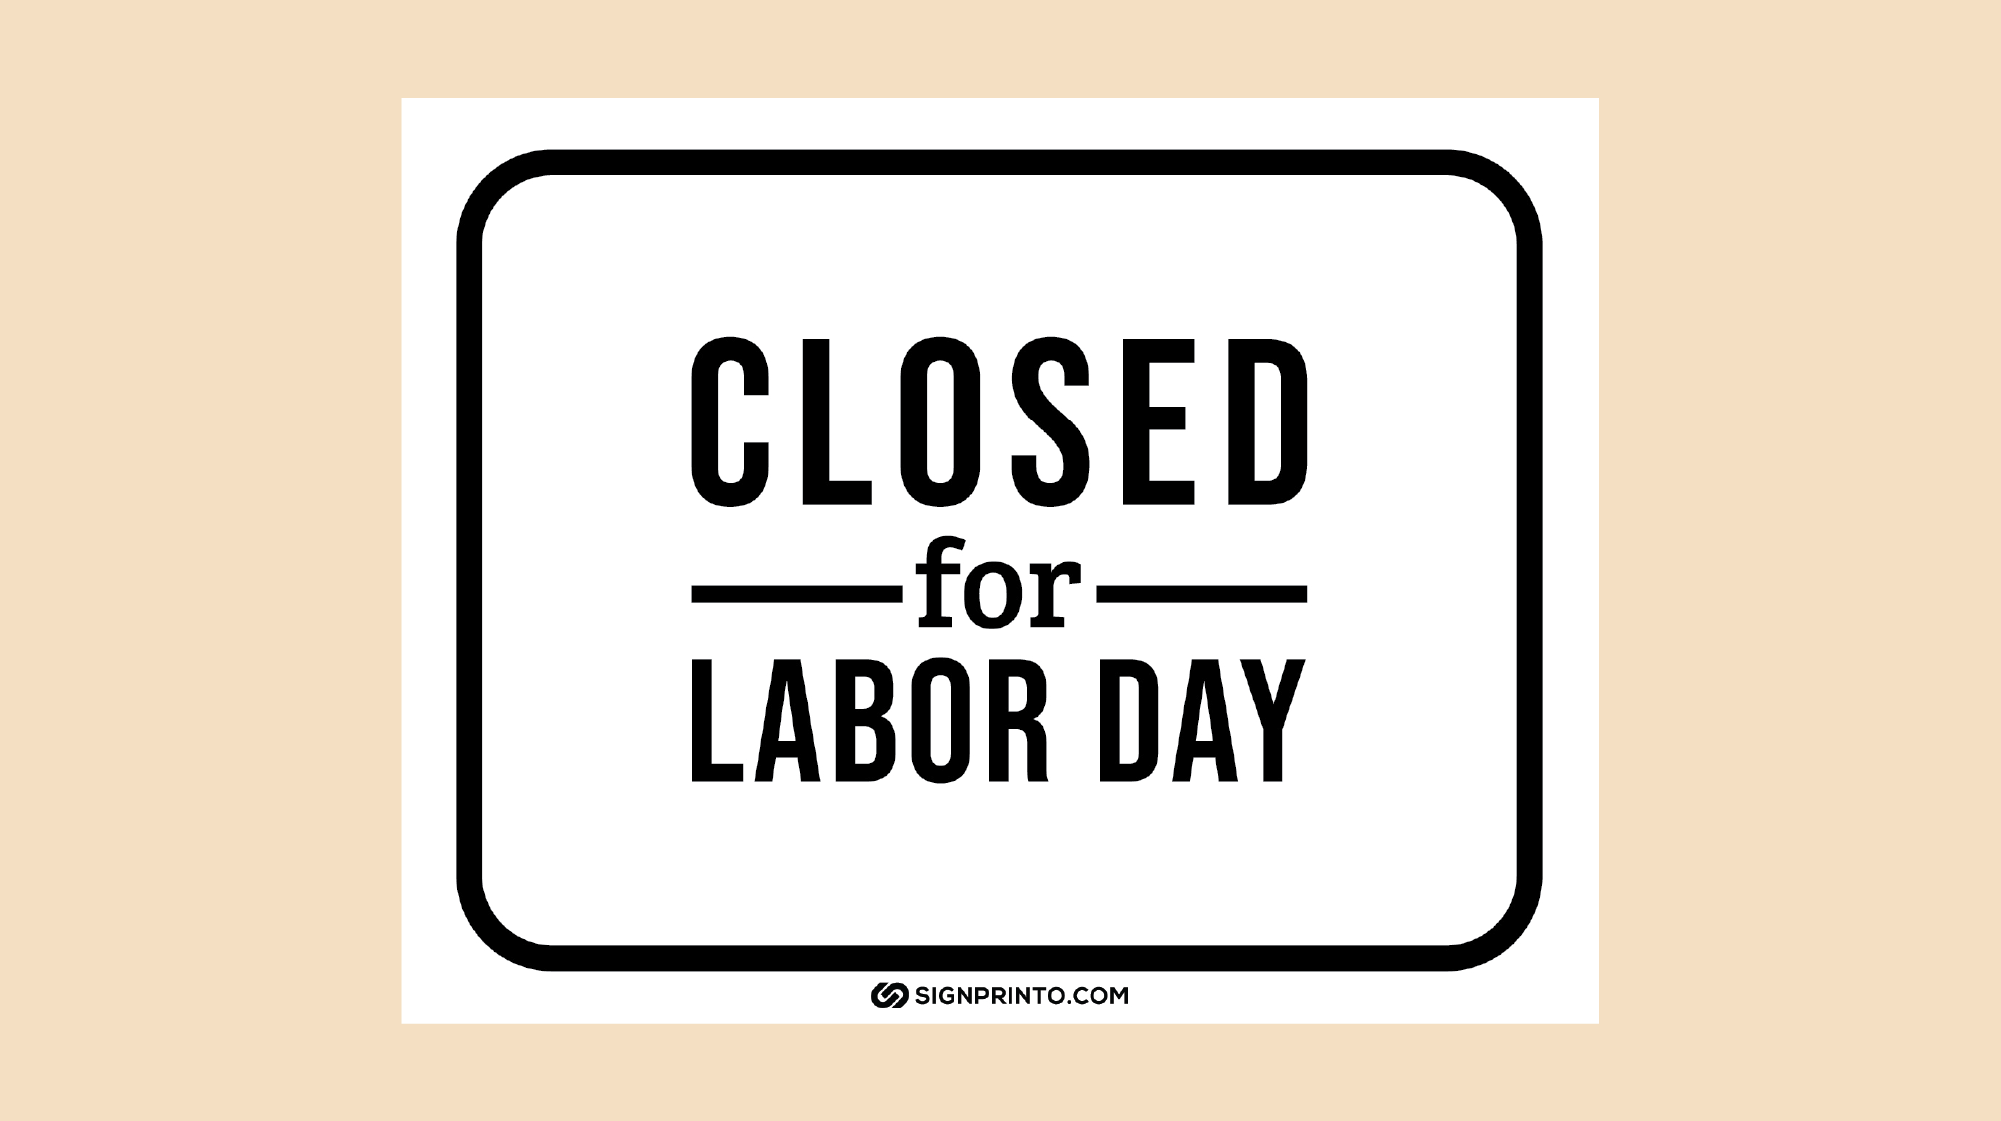 Closed for labor day - Labor Day closed sign